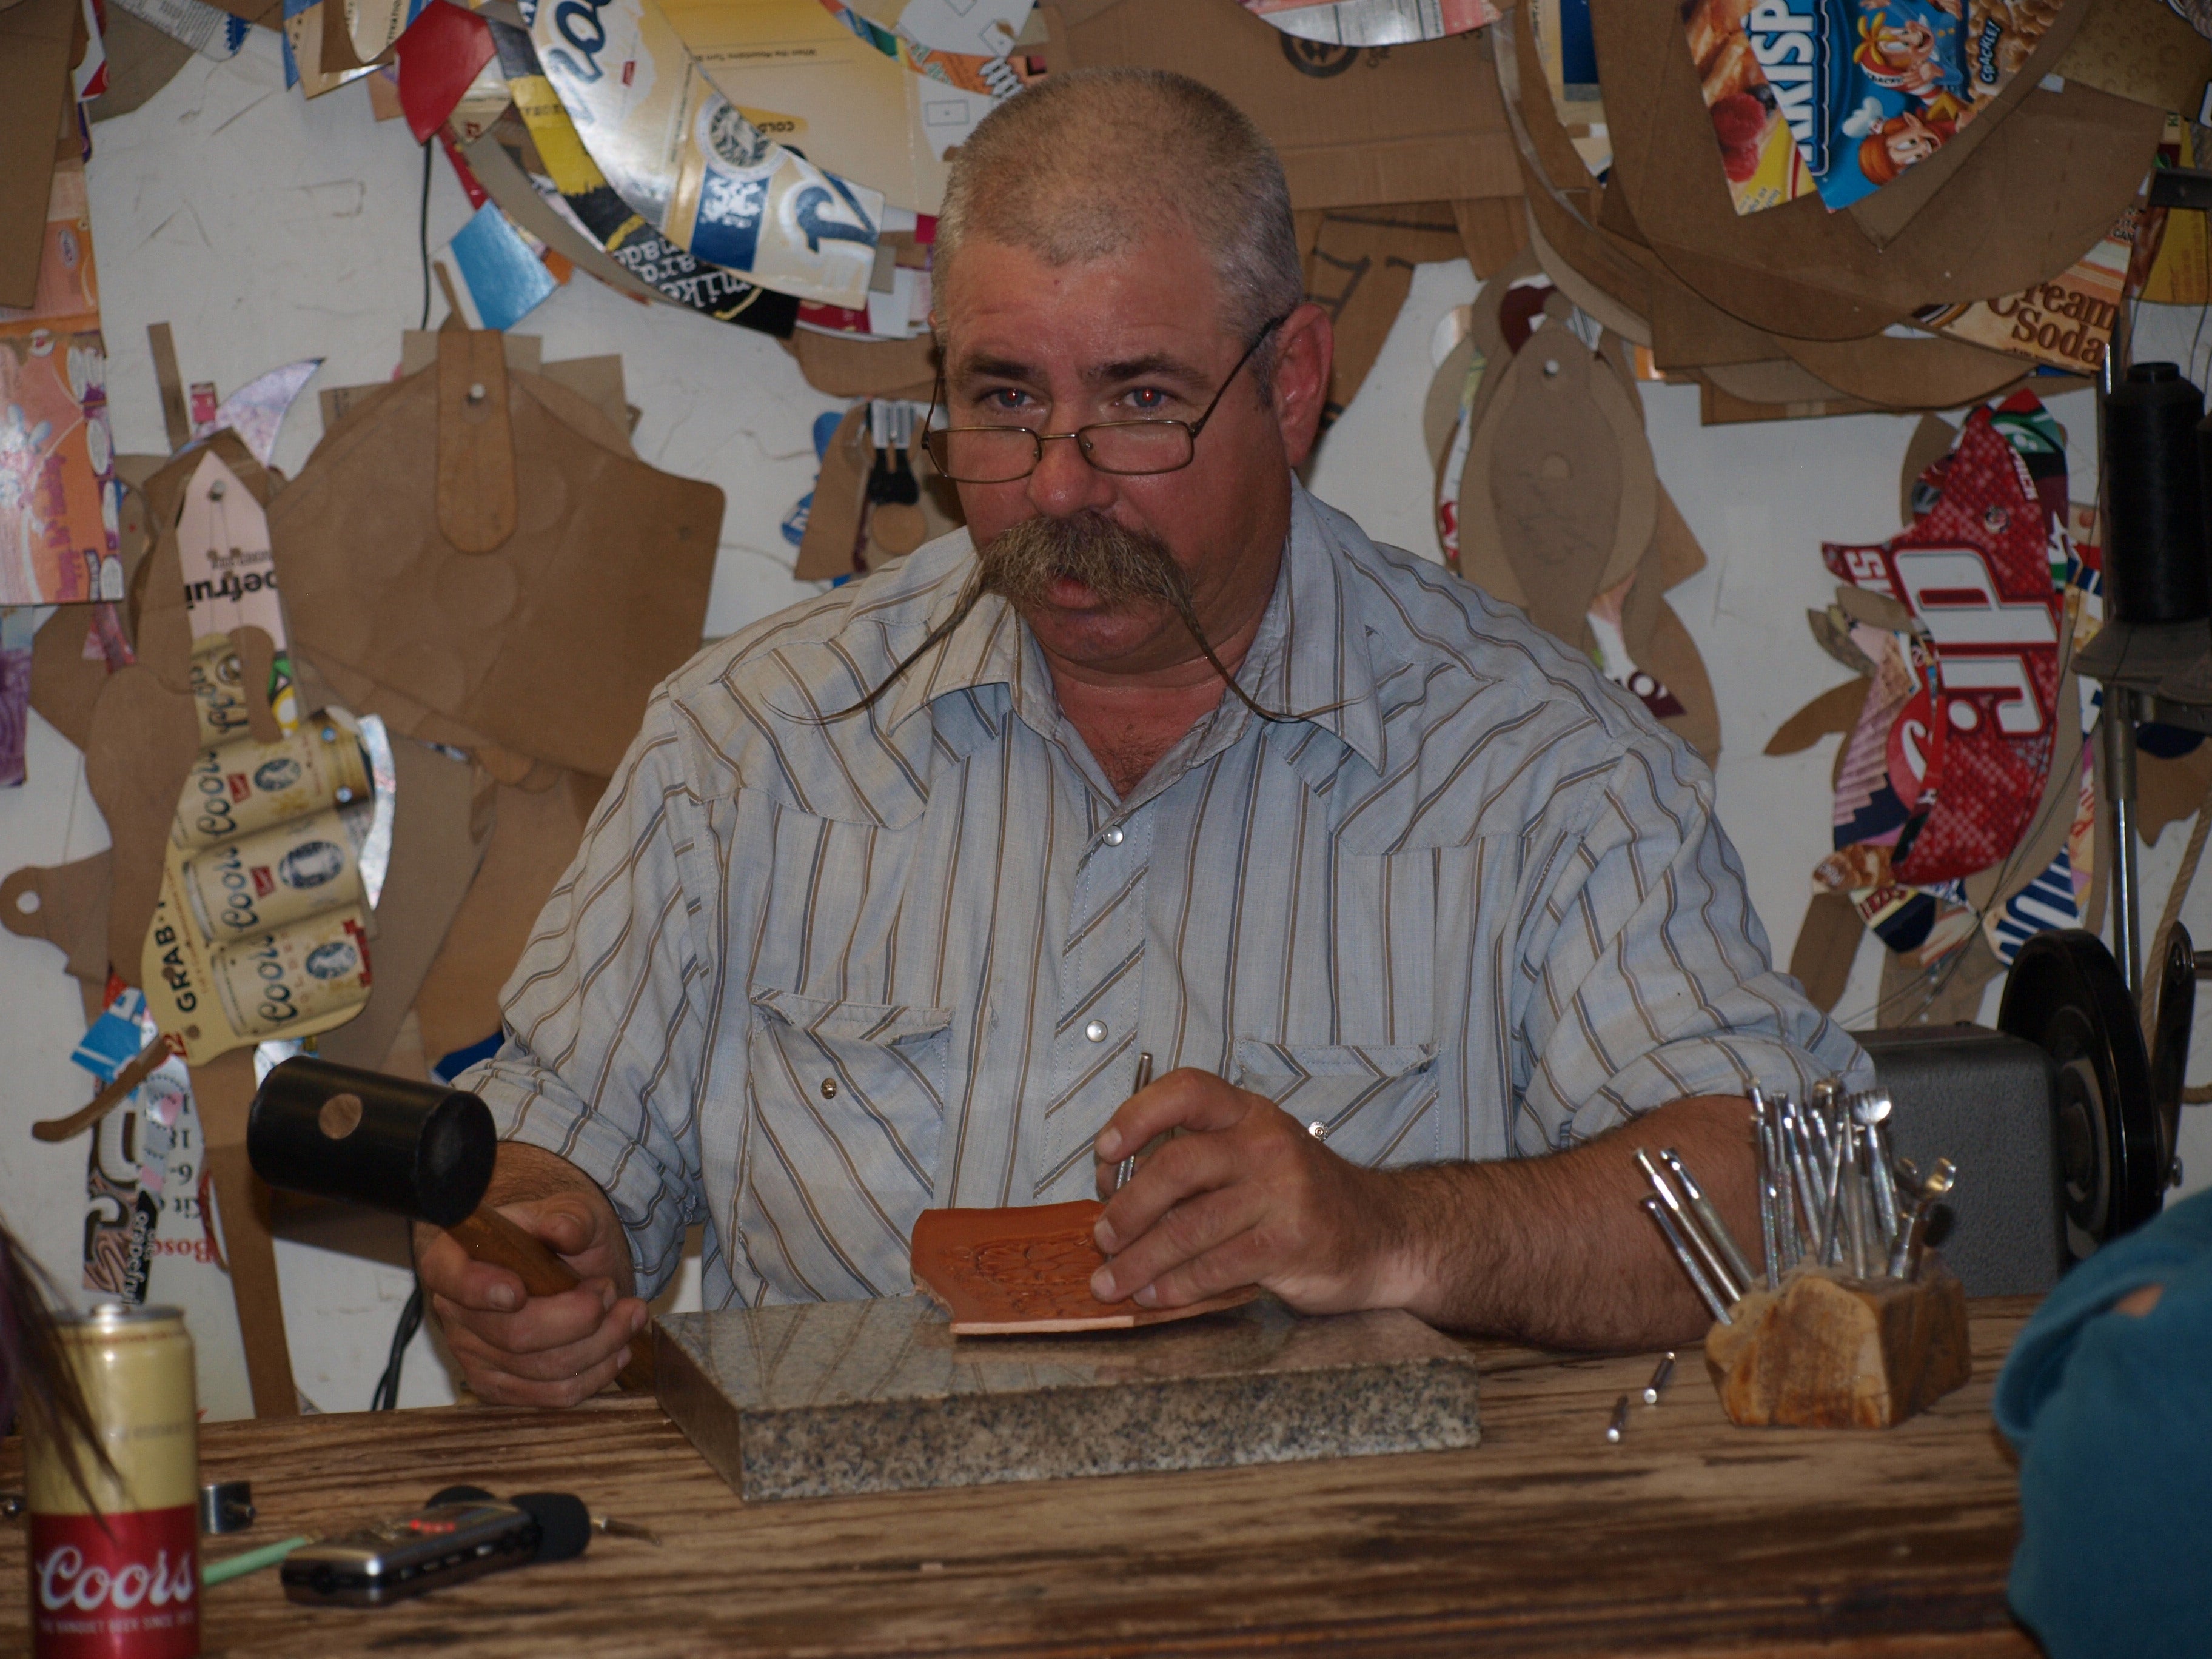 Image of Steve McKay, a white man with short gray hair, wire rim glasses, and an enormous mustache. He's holding a mallet and tapping a scrap of leather. The wall behind him is hung with cardboard saddle patterns.